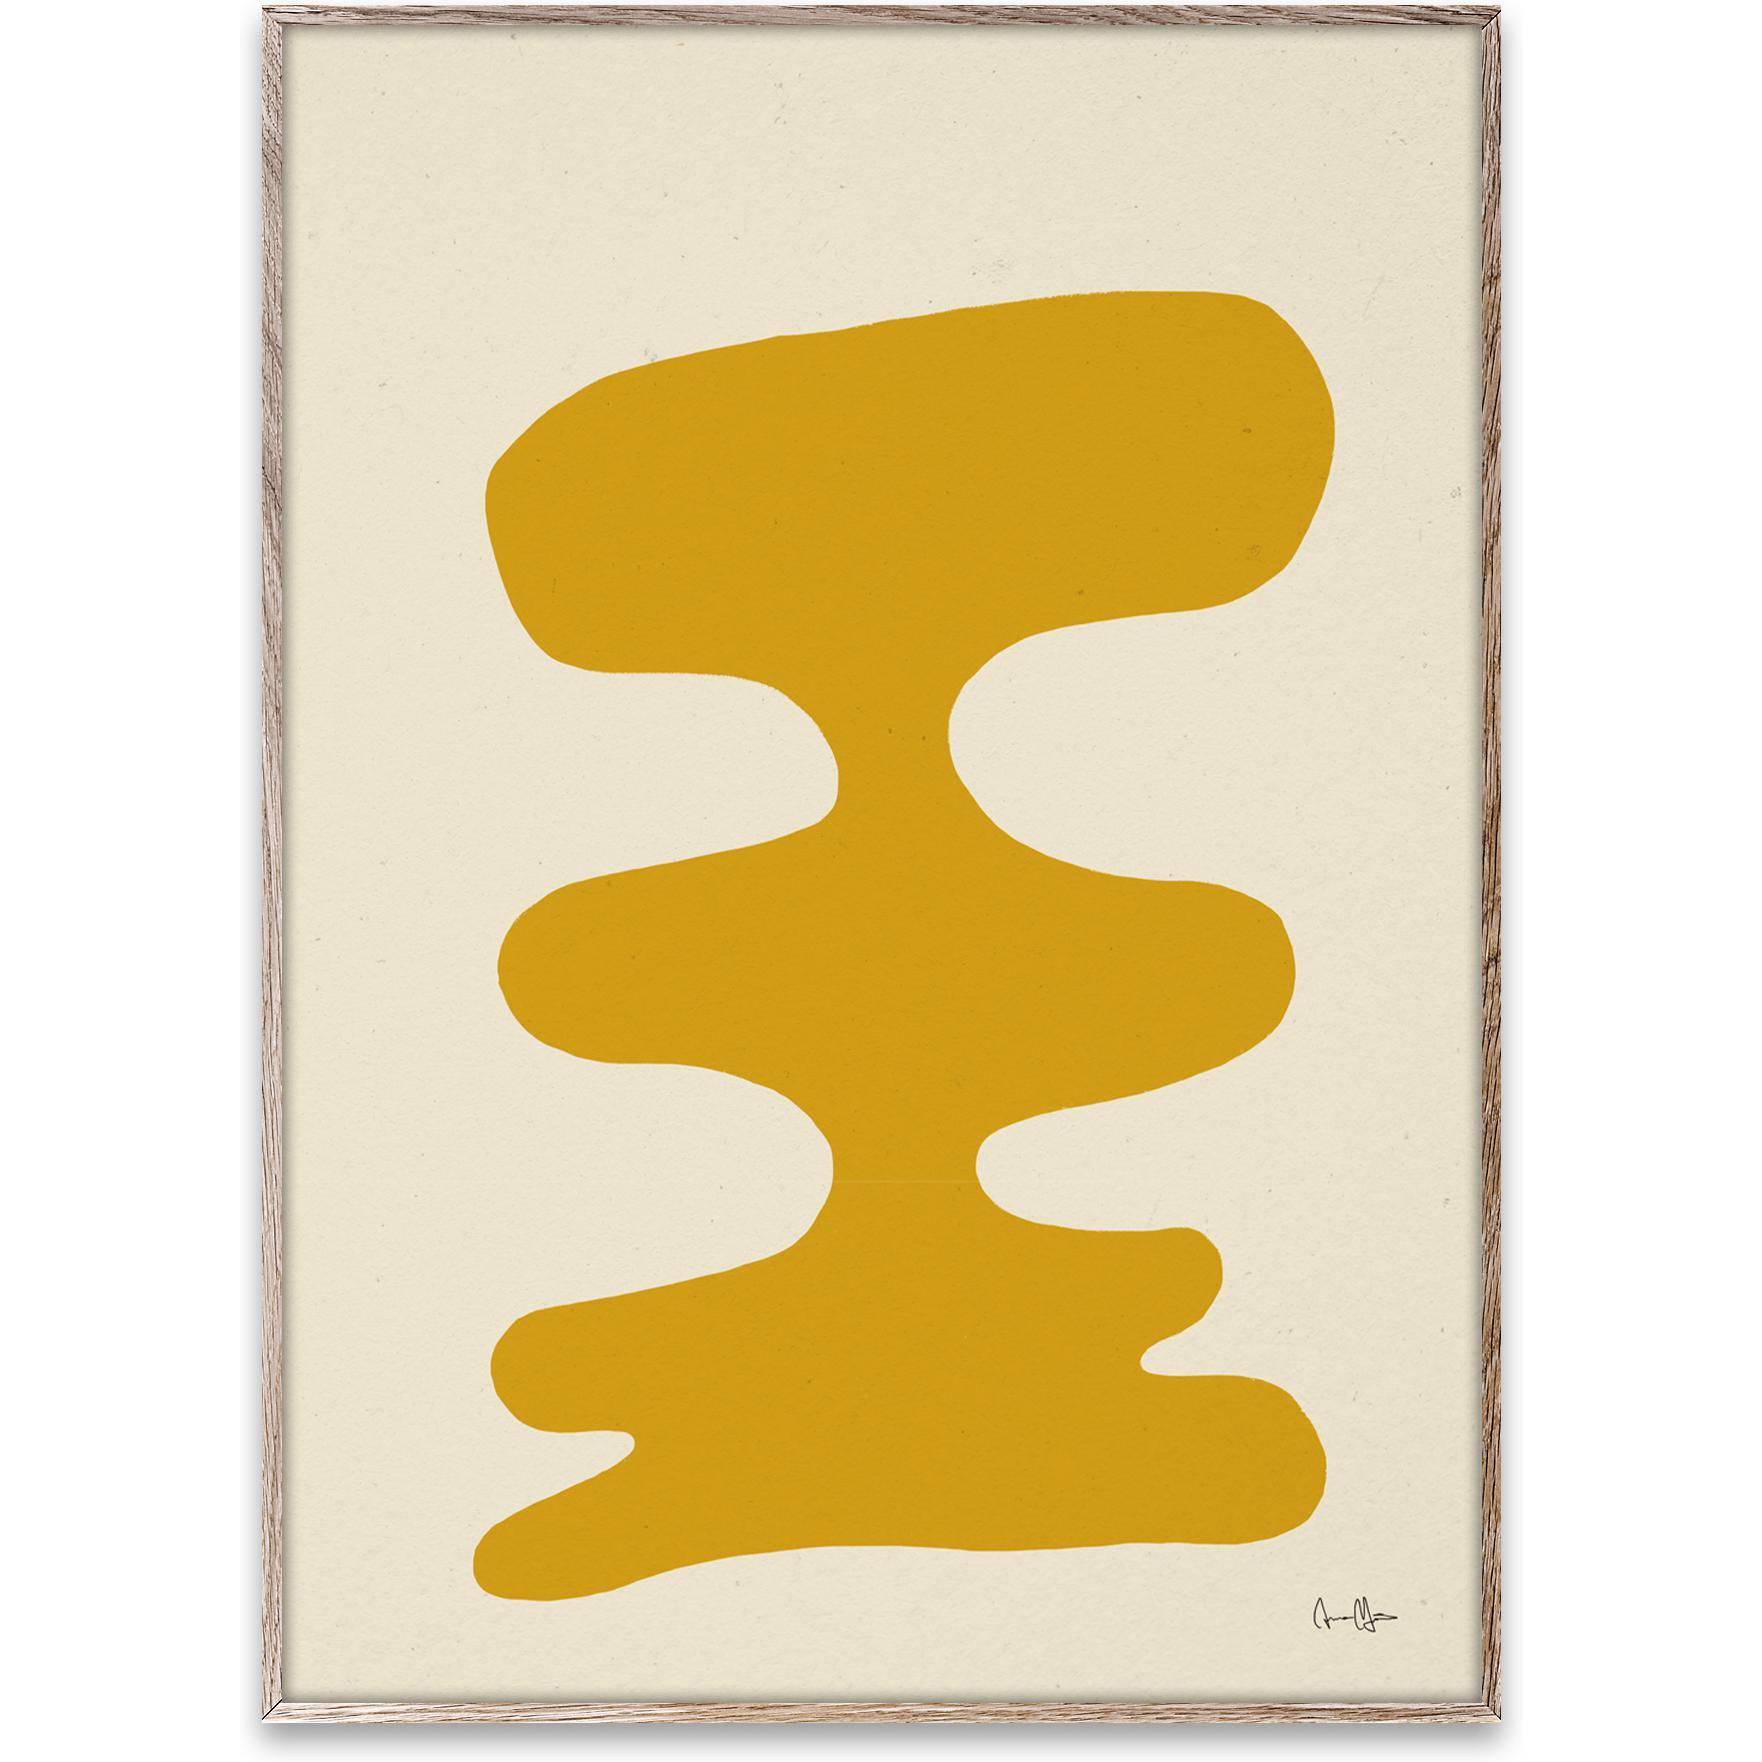 Paper Collective Soft Yellow Poster, 50x70 Cm